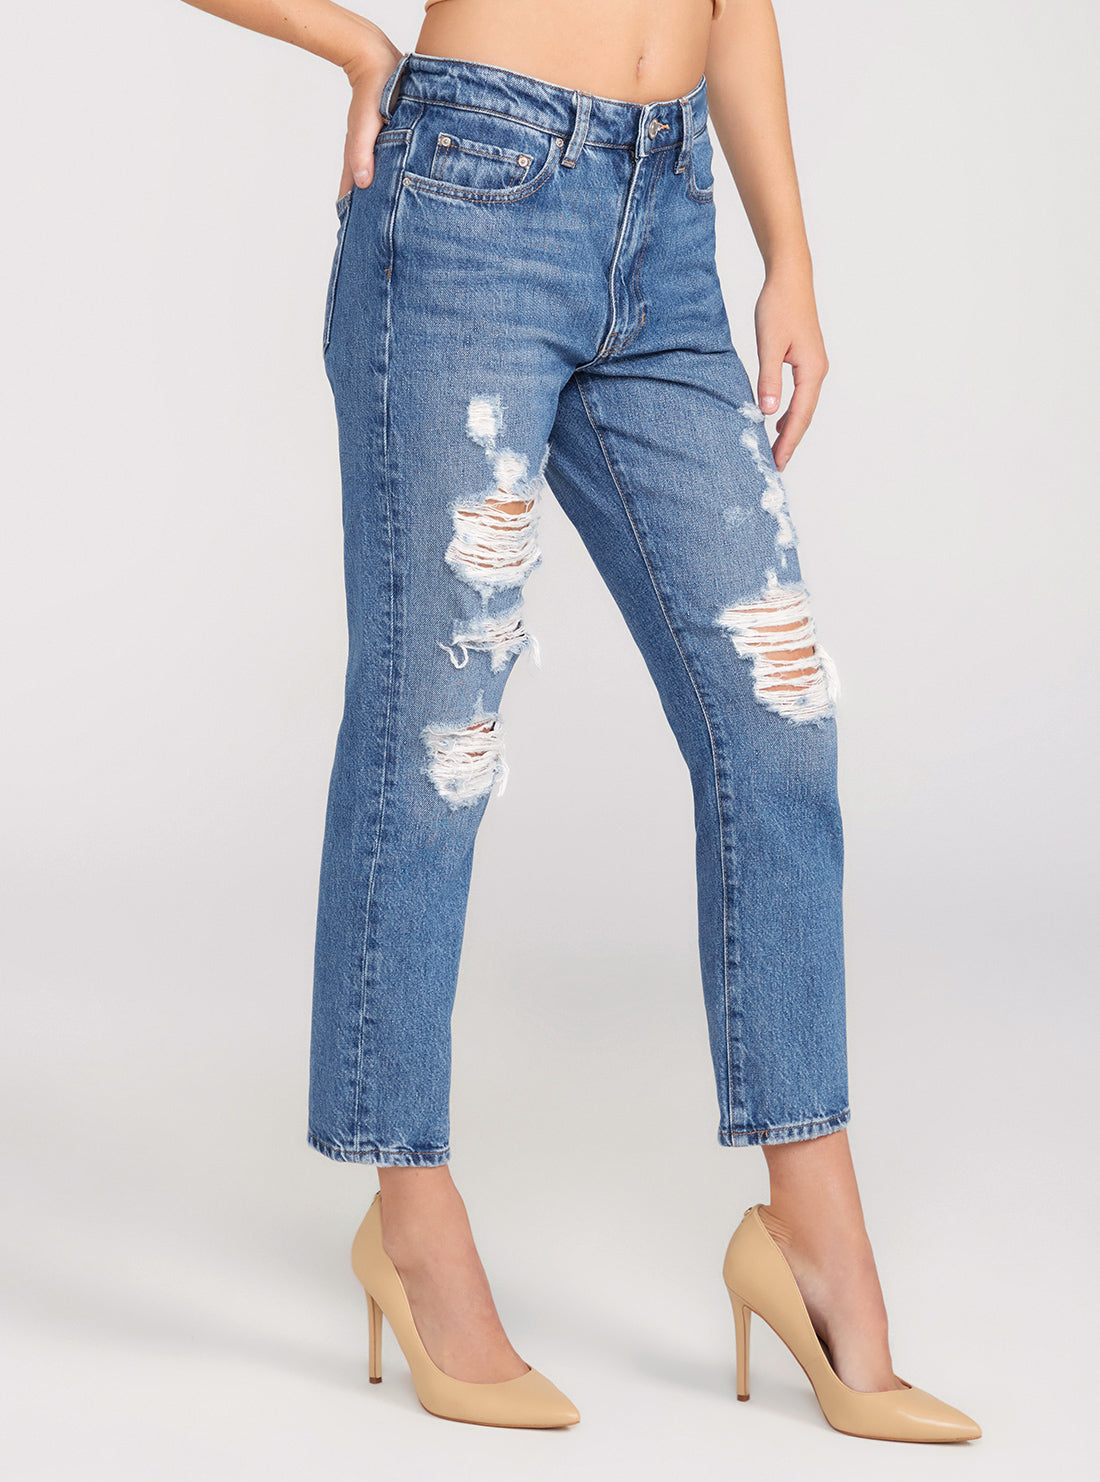 GUESS Mid-Rise Ripped Cropped It Girl Jeans In Medium Wash side view